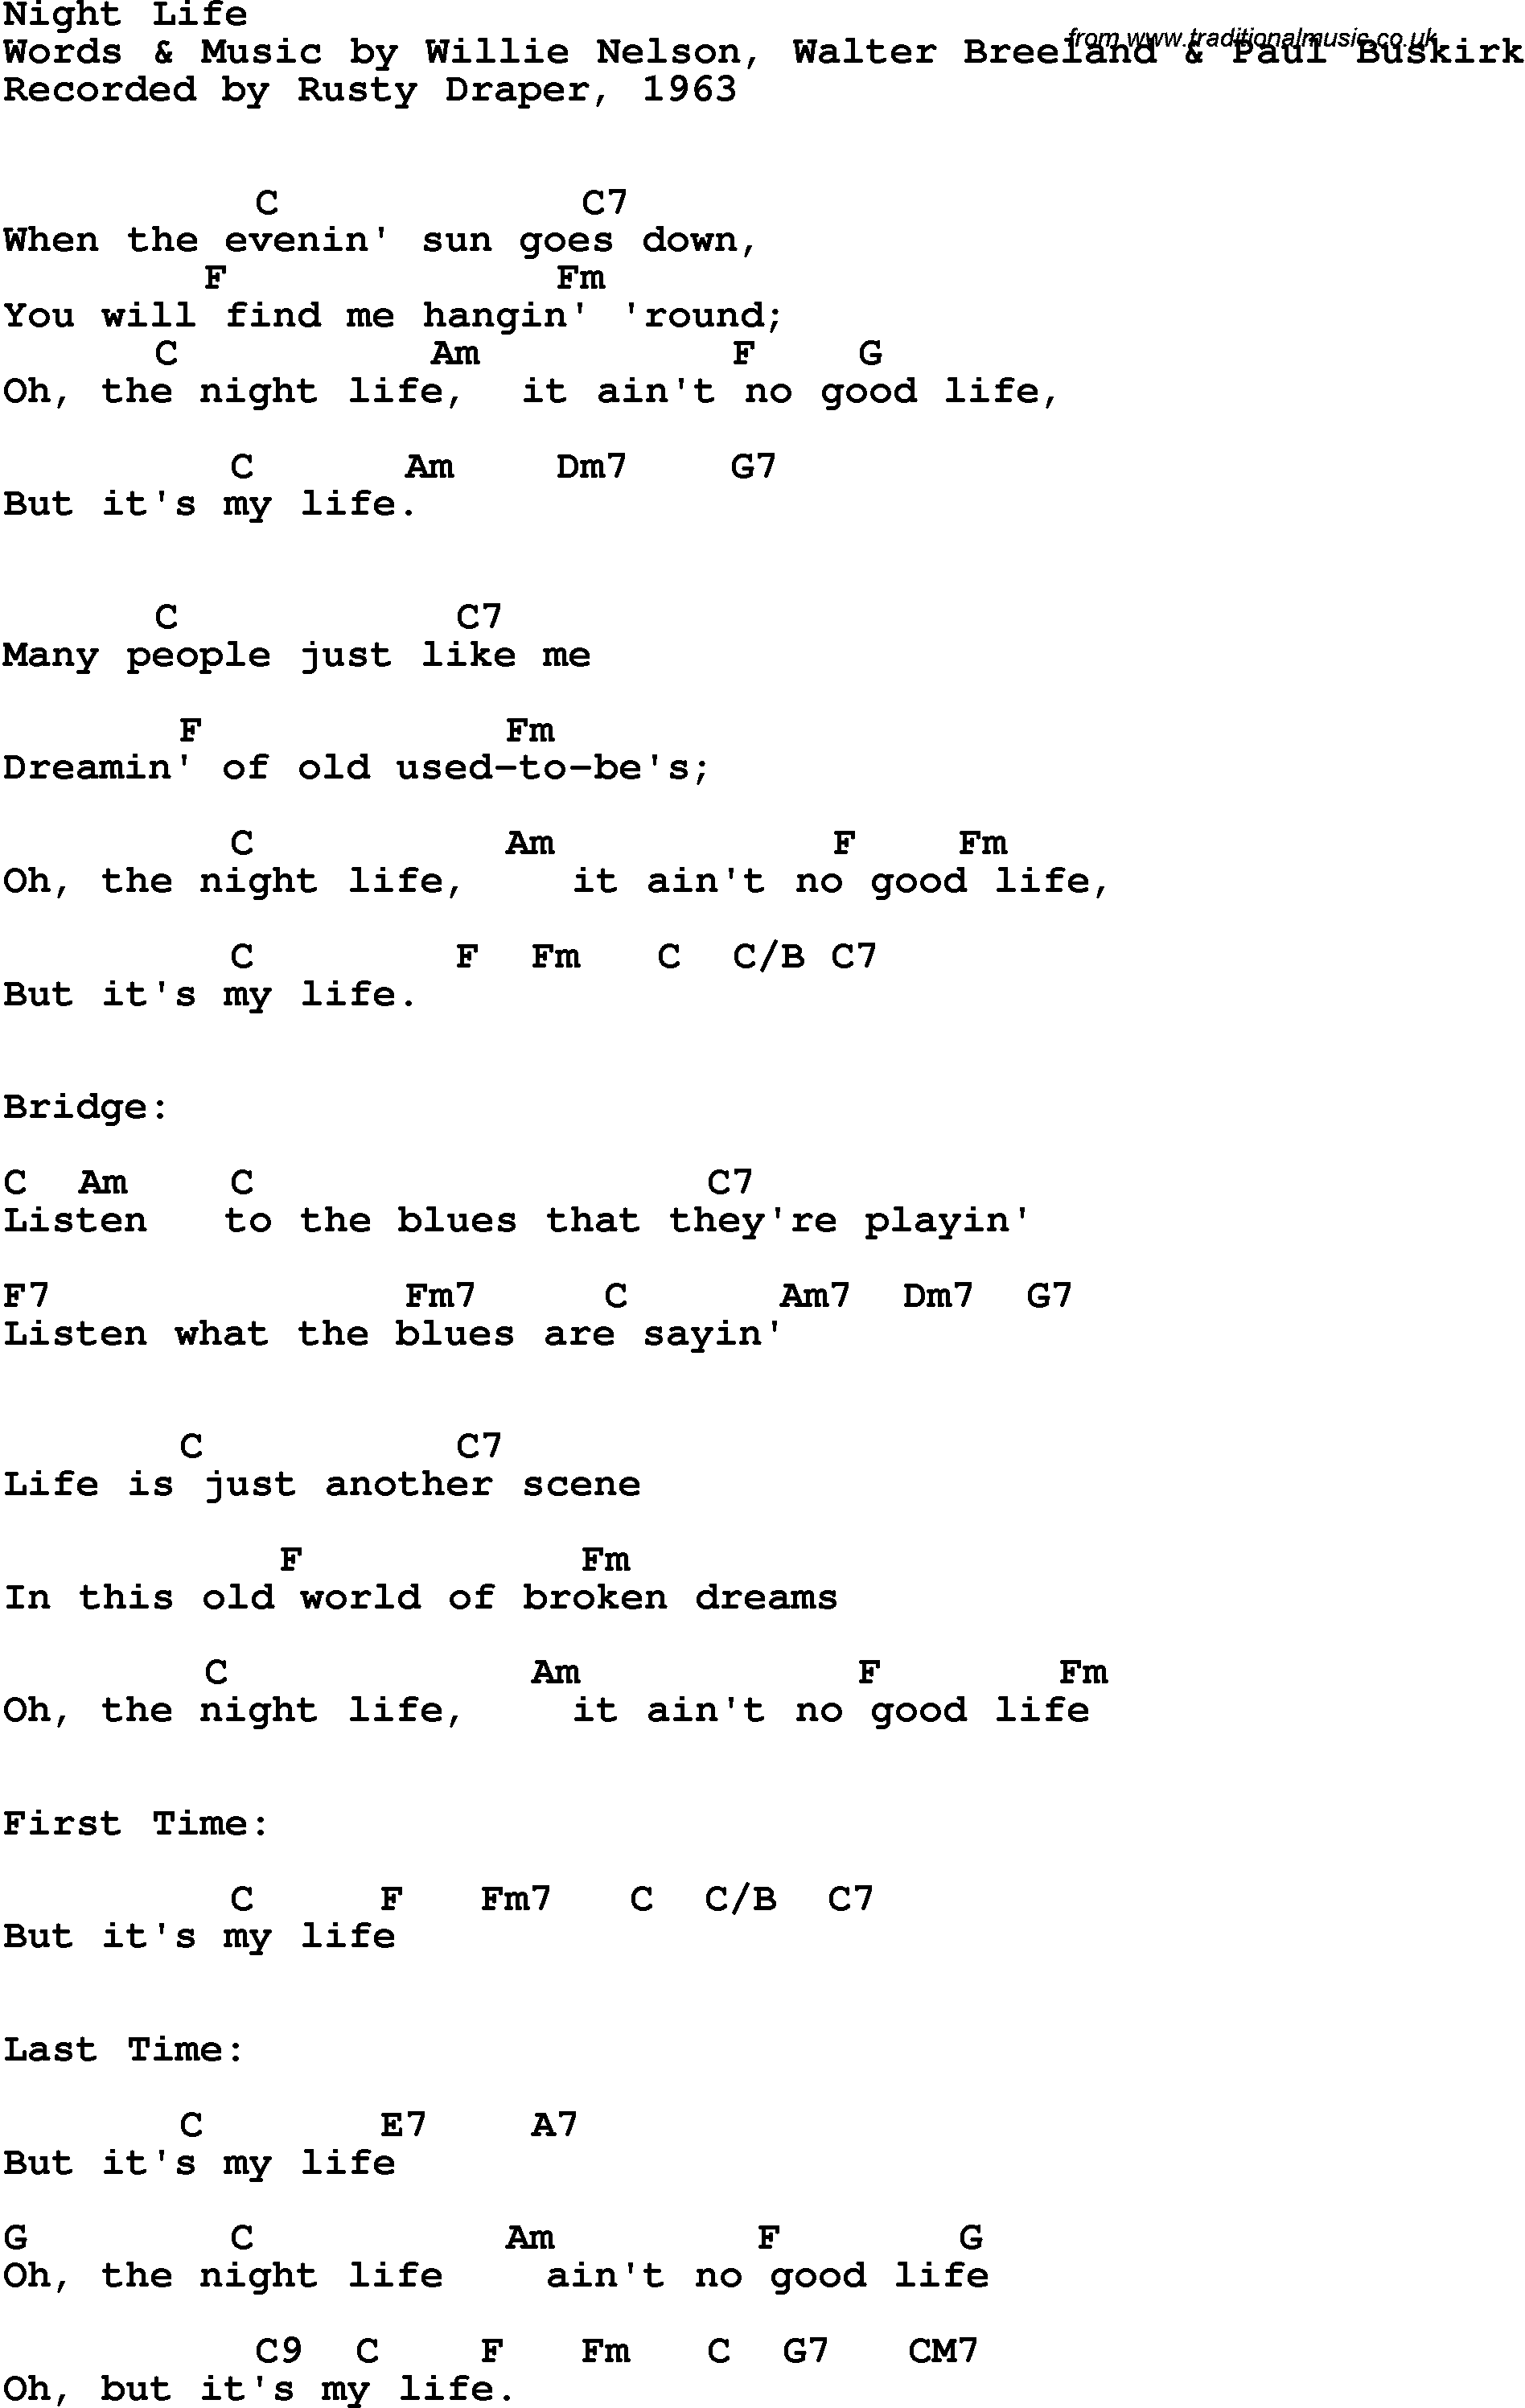 Song Lyrics with guitar chords for Night Life - Rusty Draper, 1963